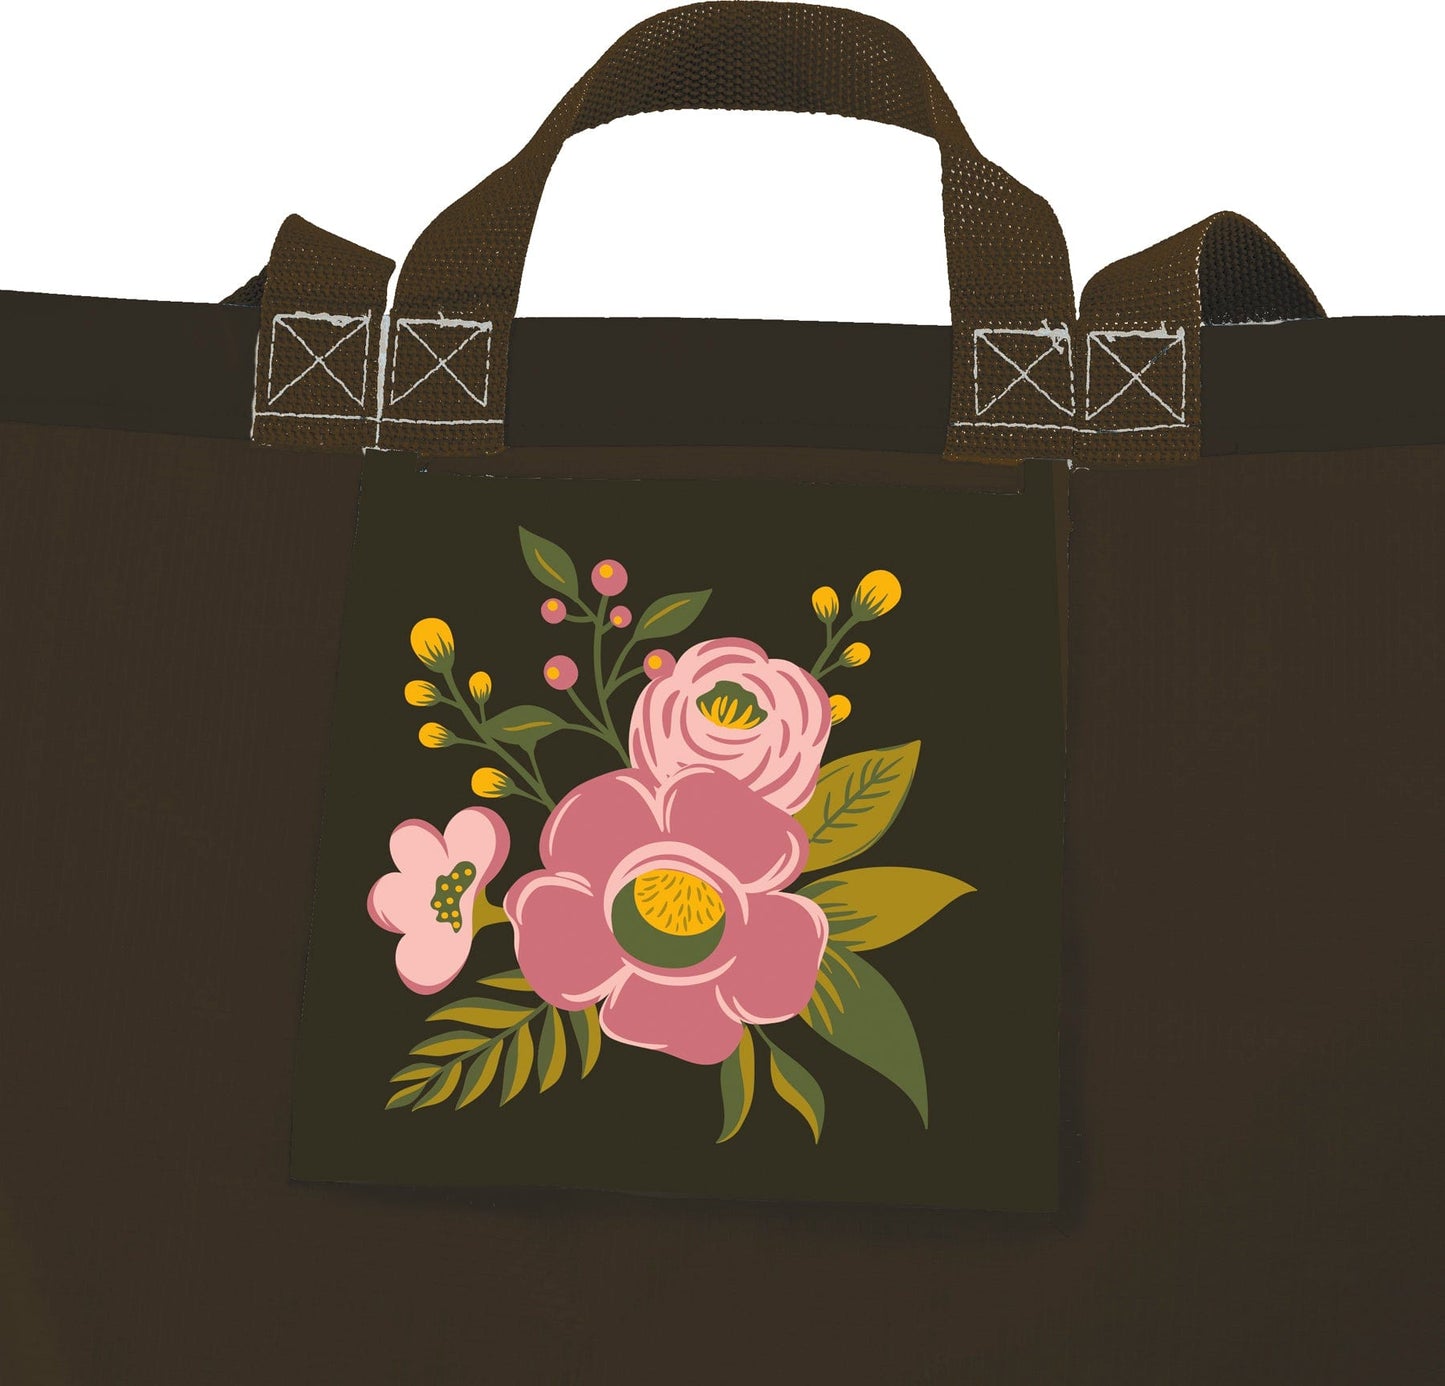 Shopping Totes Market Tote - Live Your Best Life PBK-108351